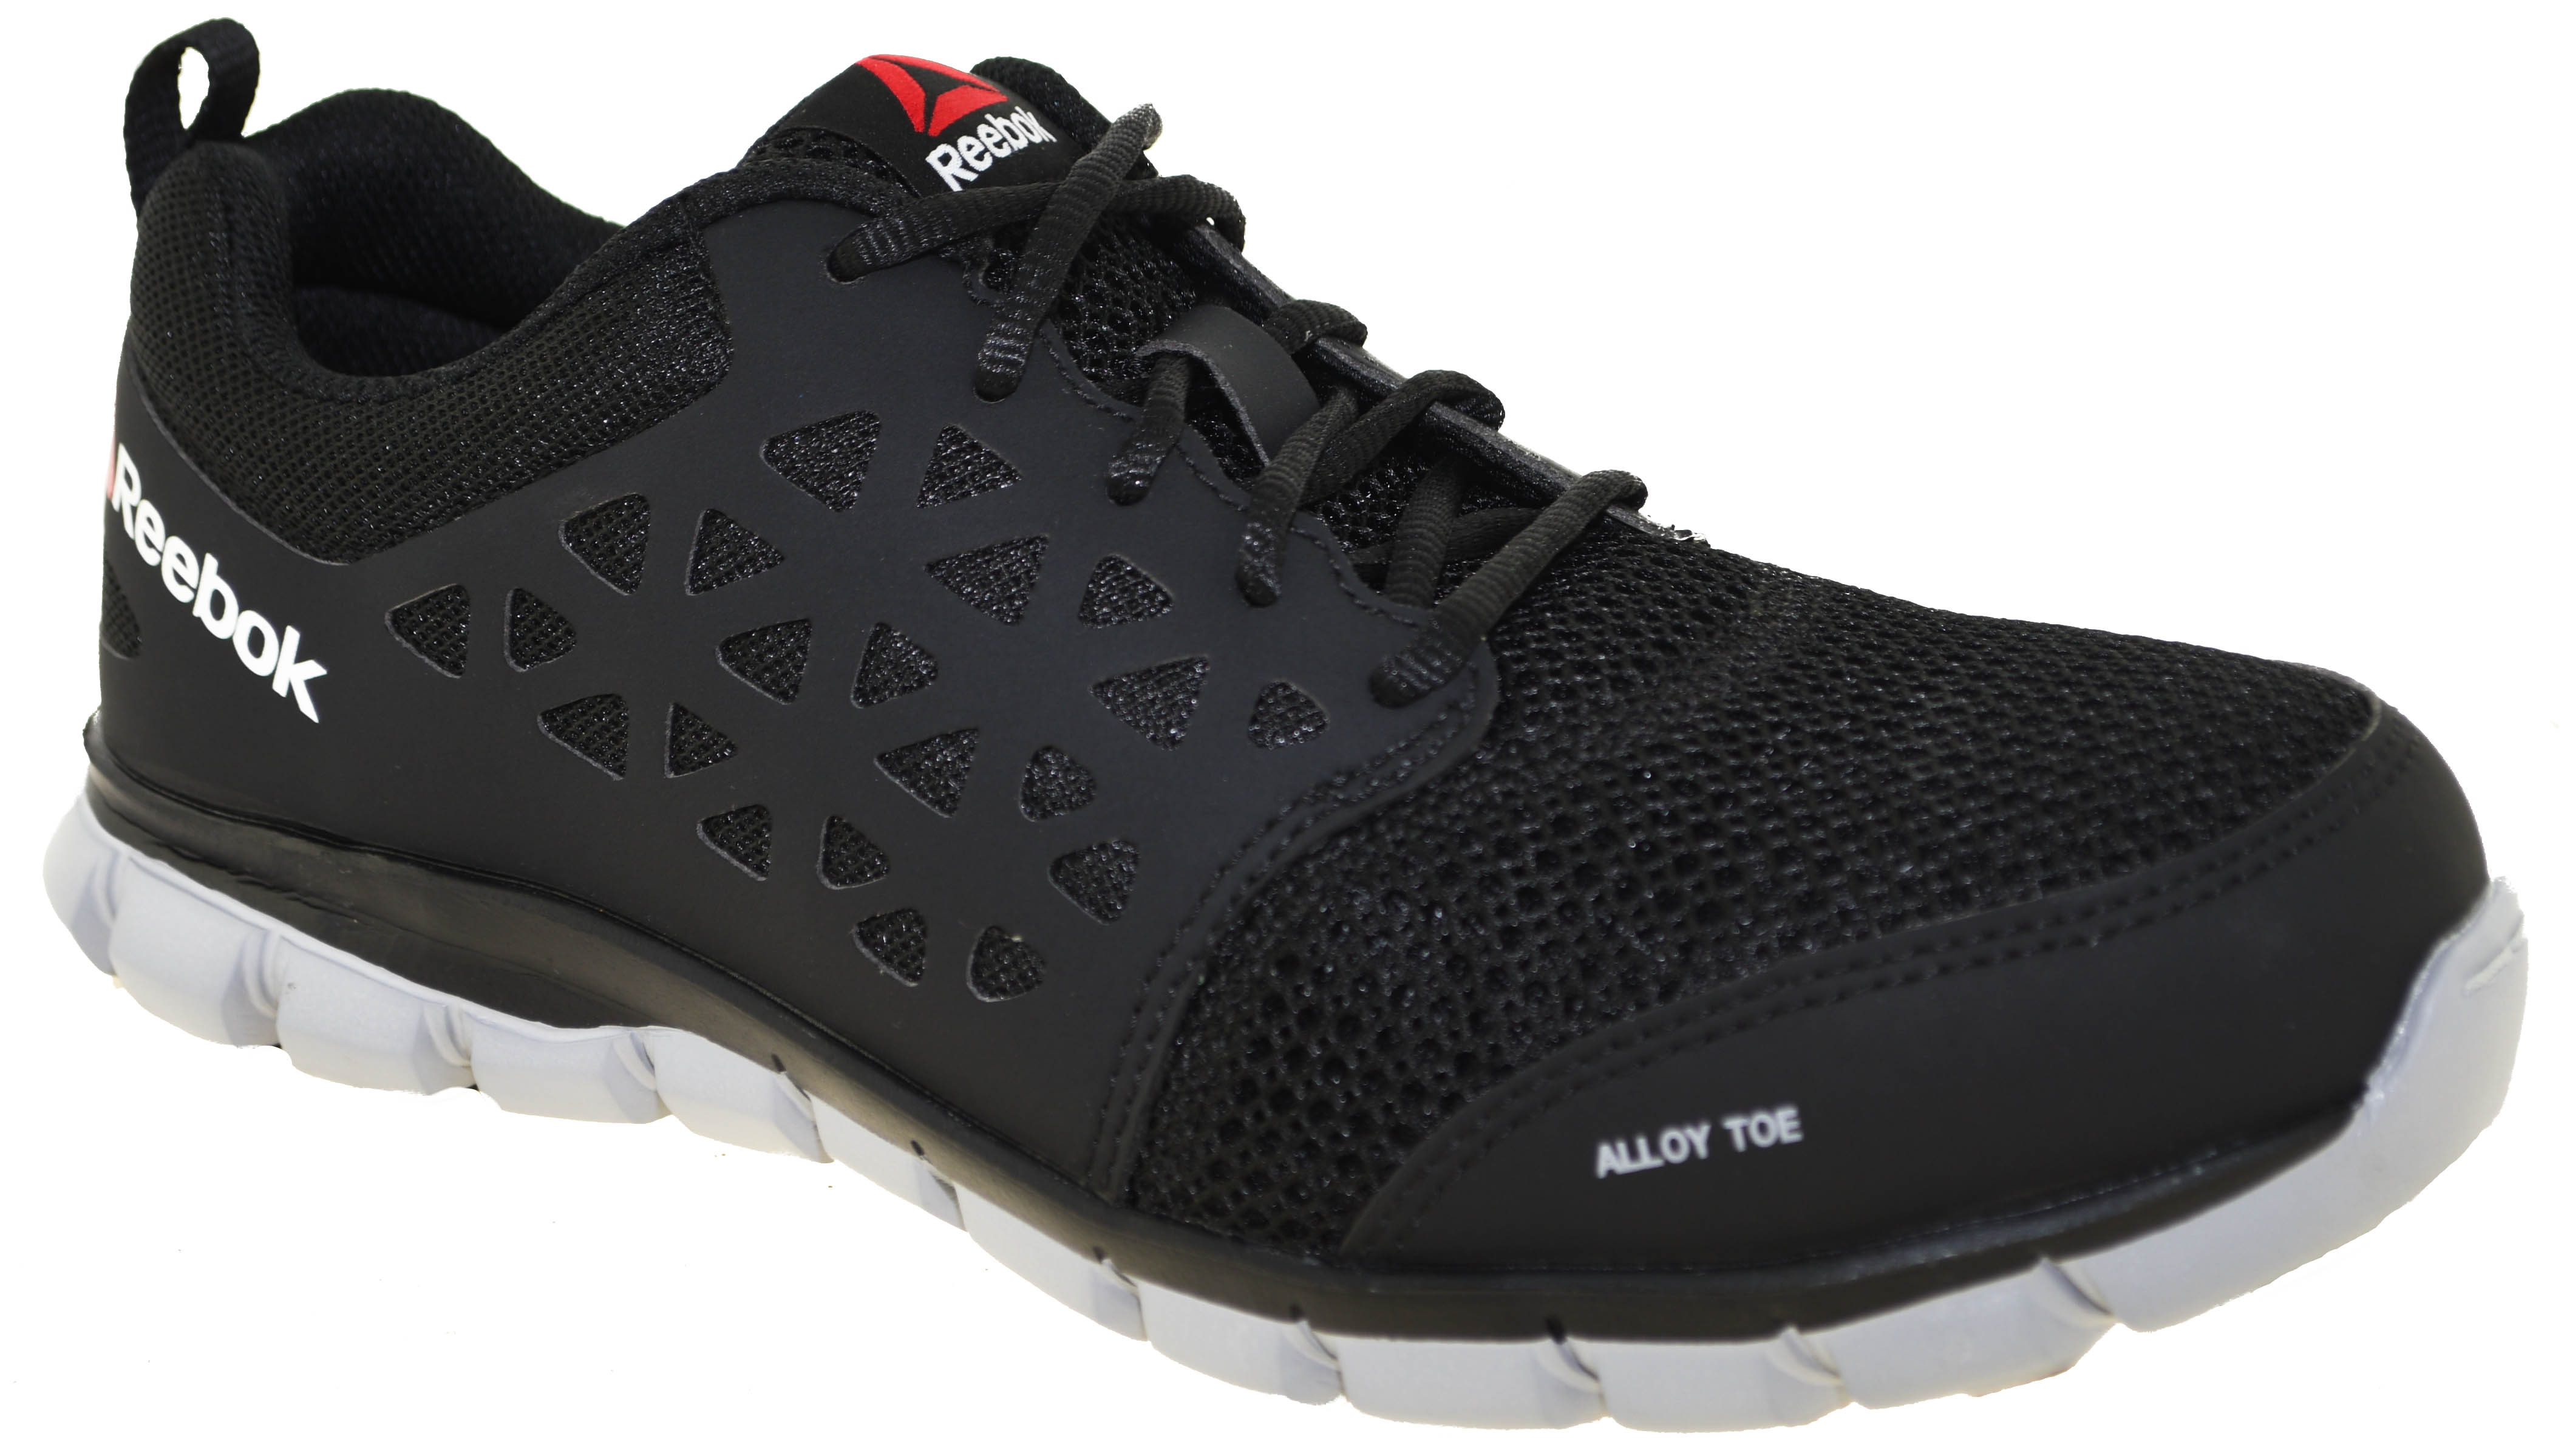 rb416 esd safety shoe